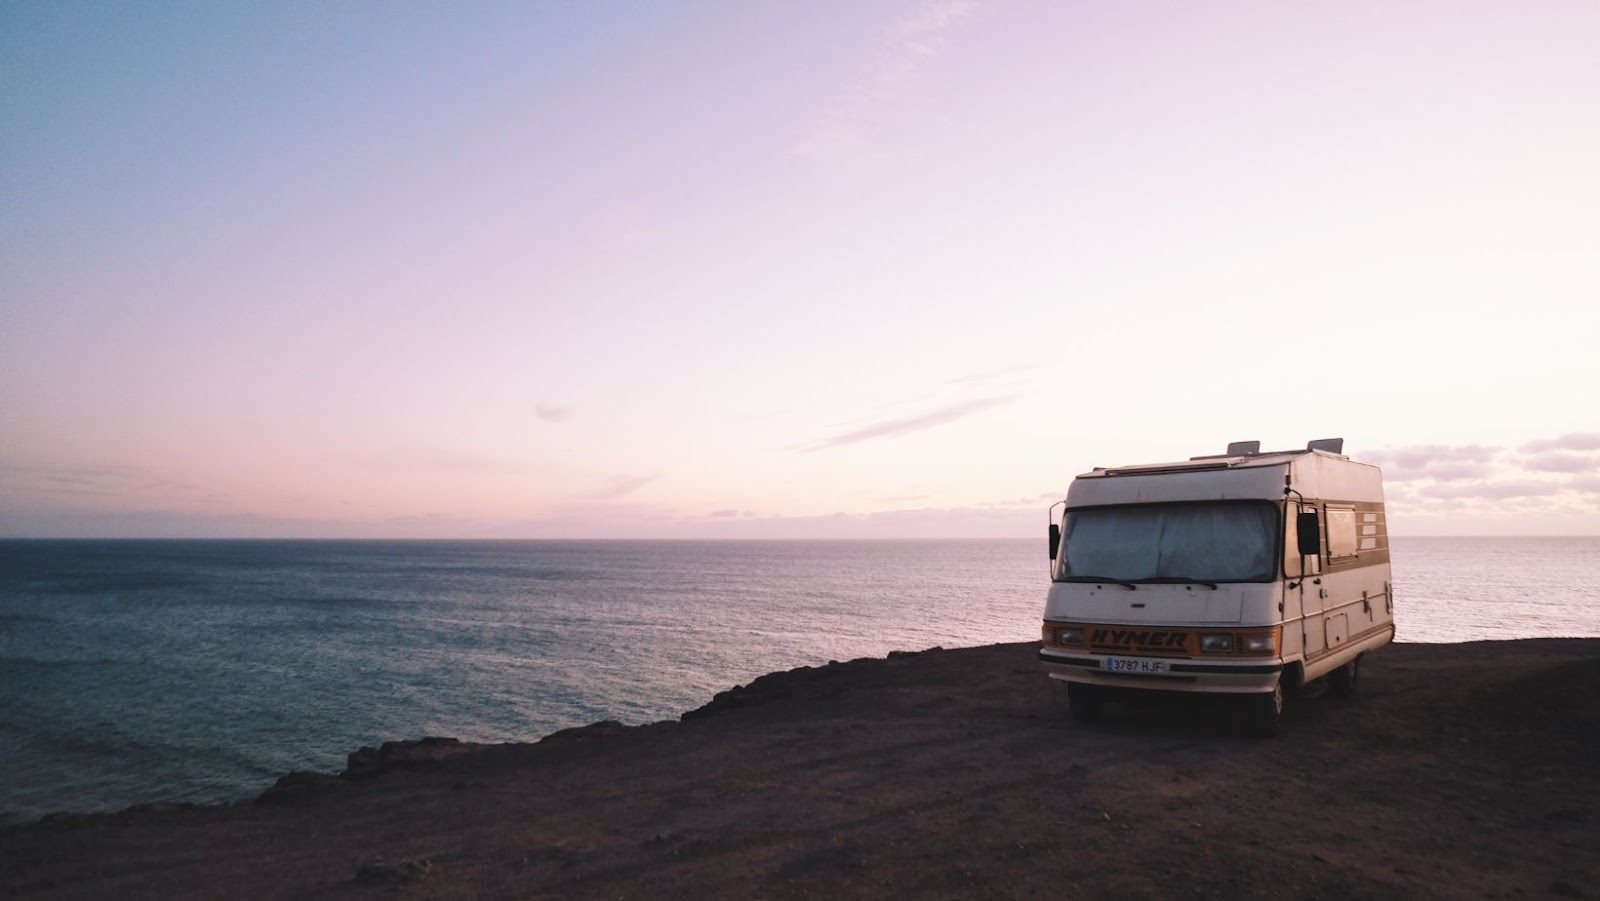 Factors That Can Affect Your RV Insurance Rates